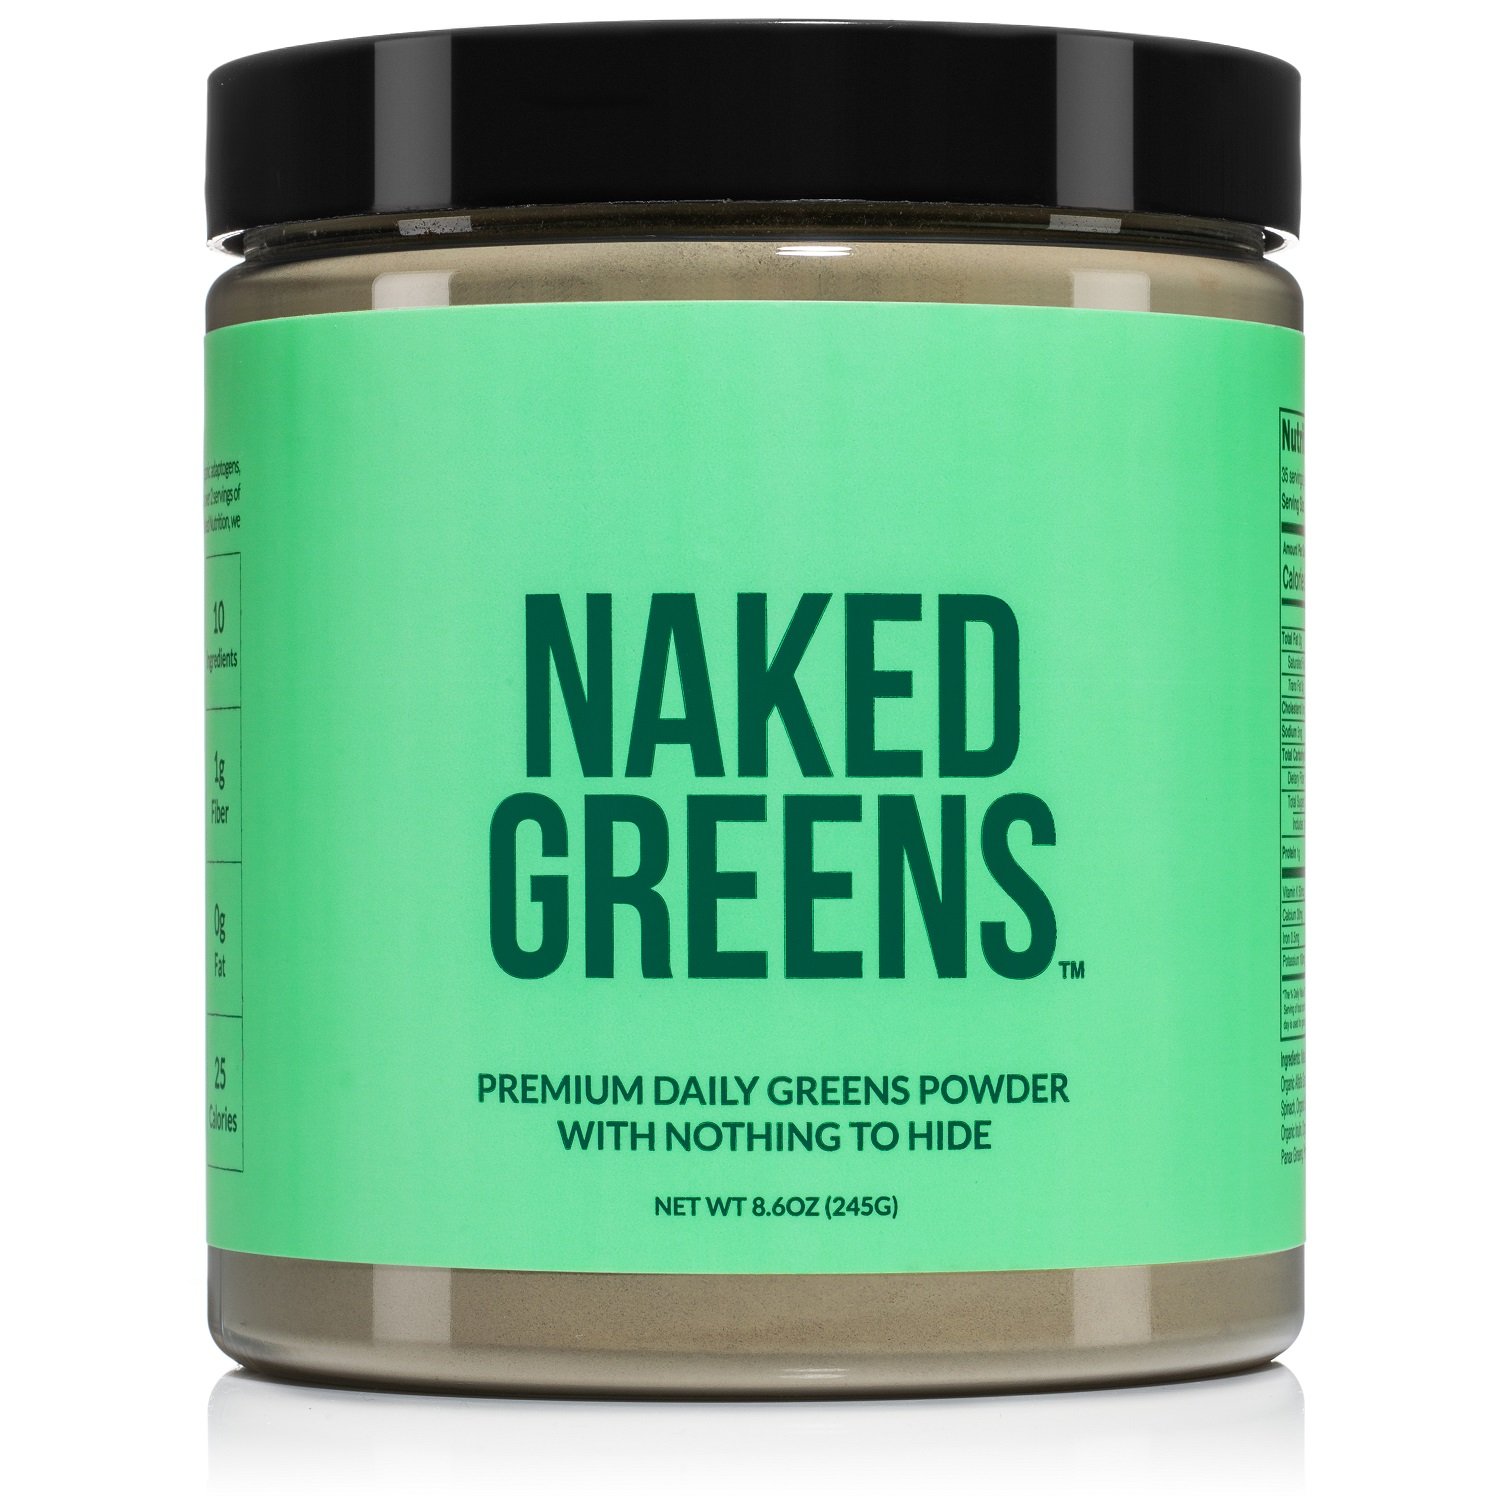 Naked Greens A Healthy Organic Superfood Powder For A Great Price